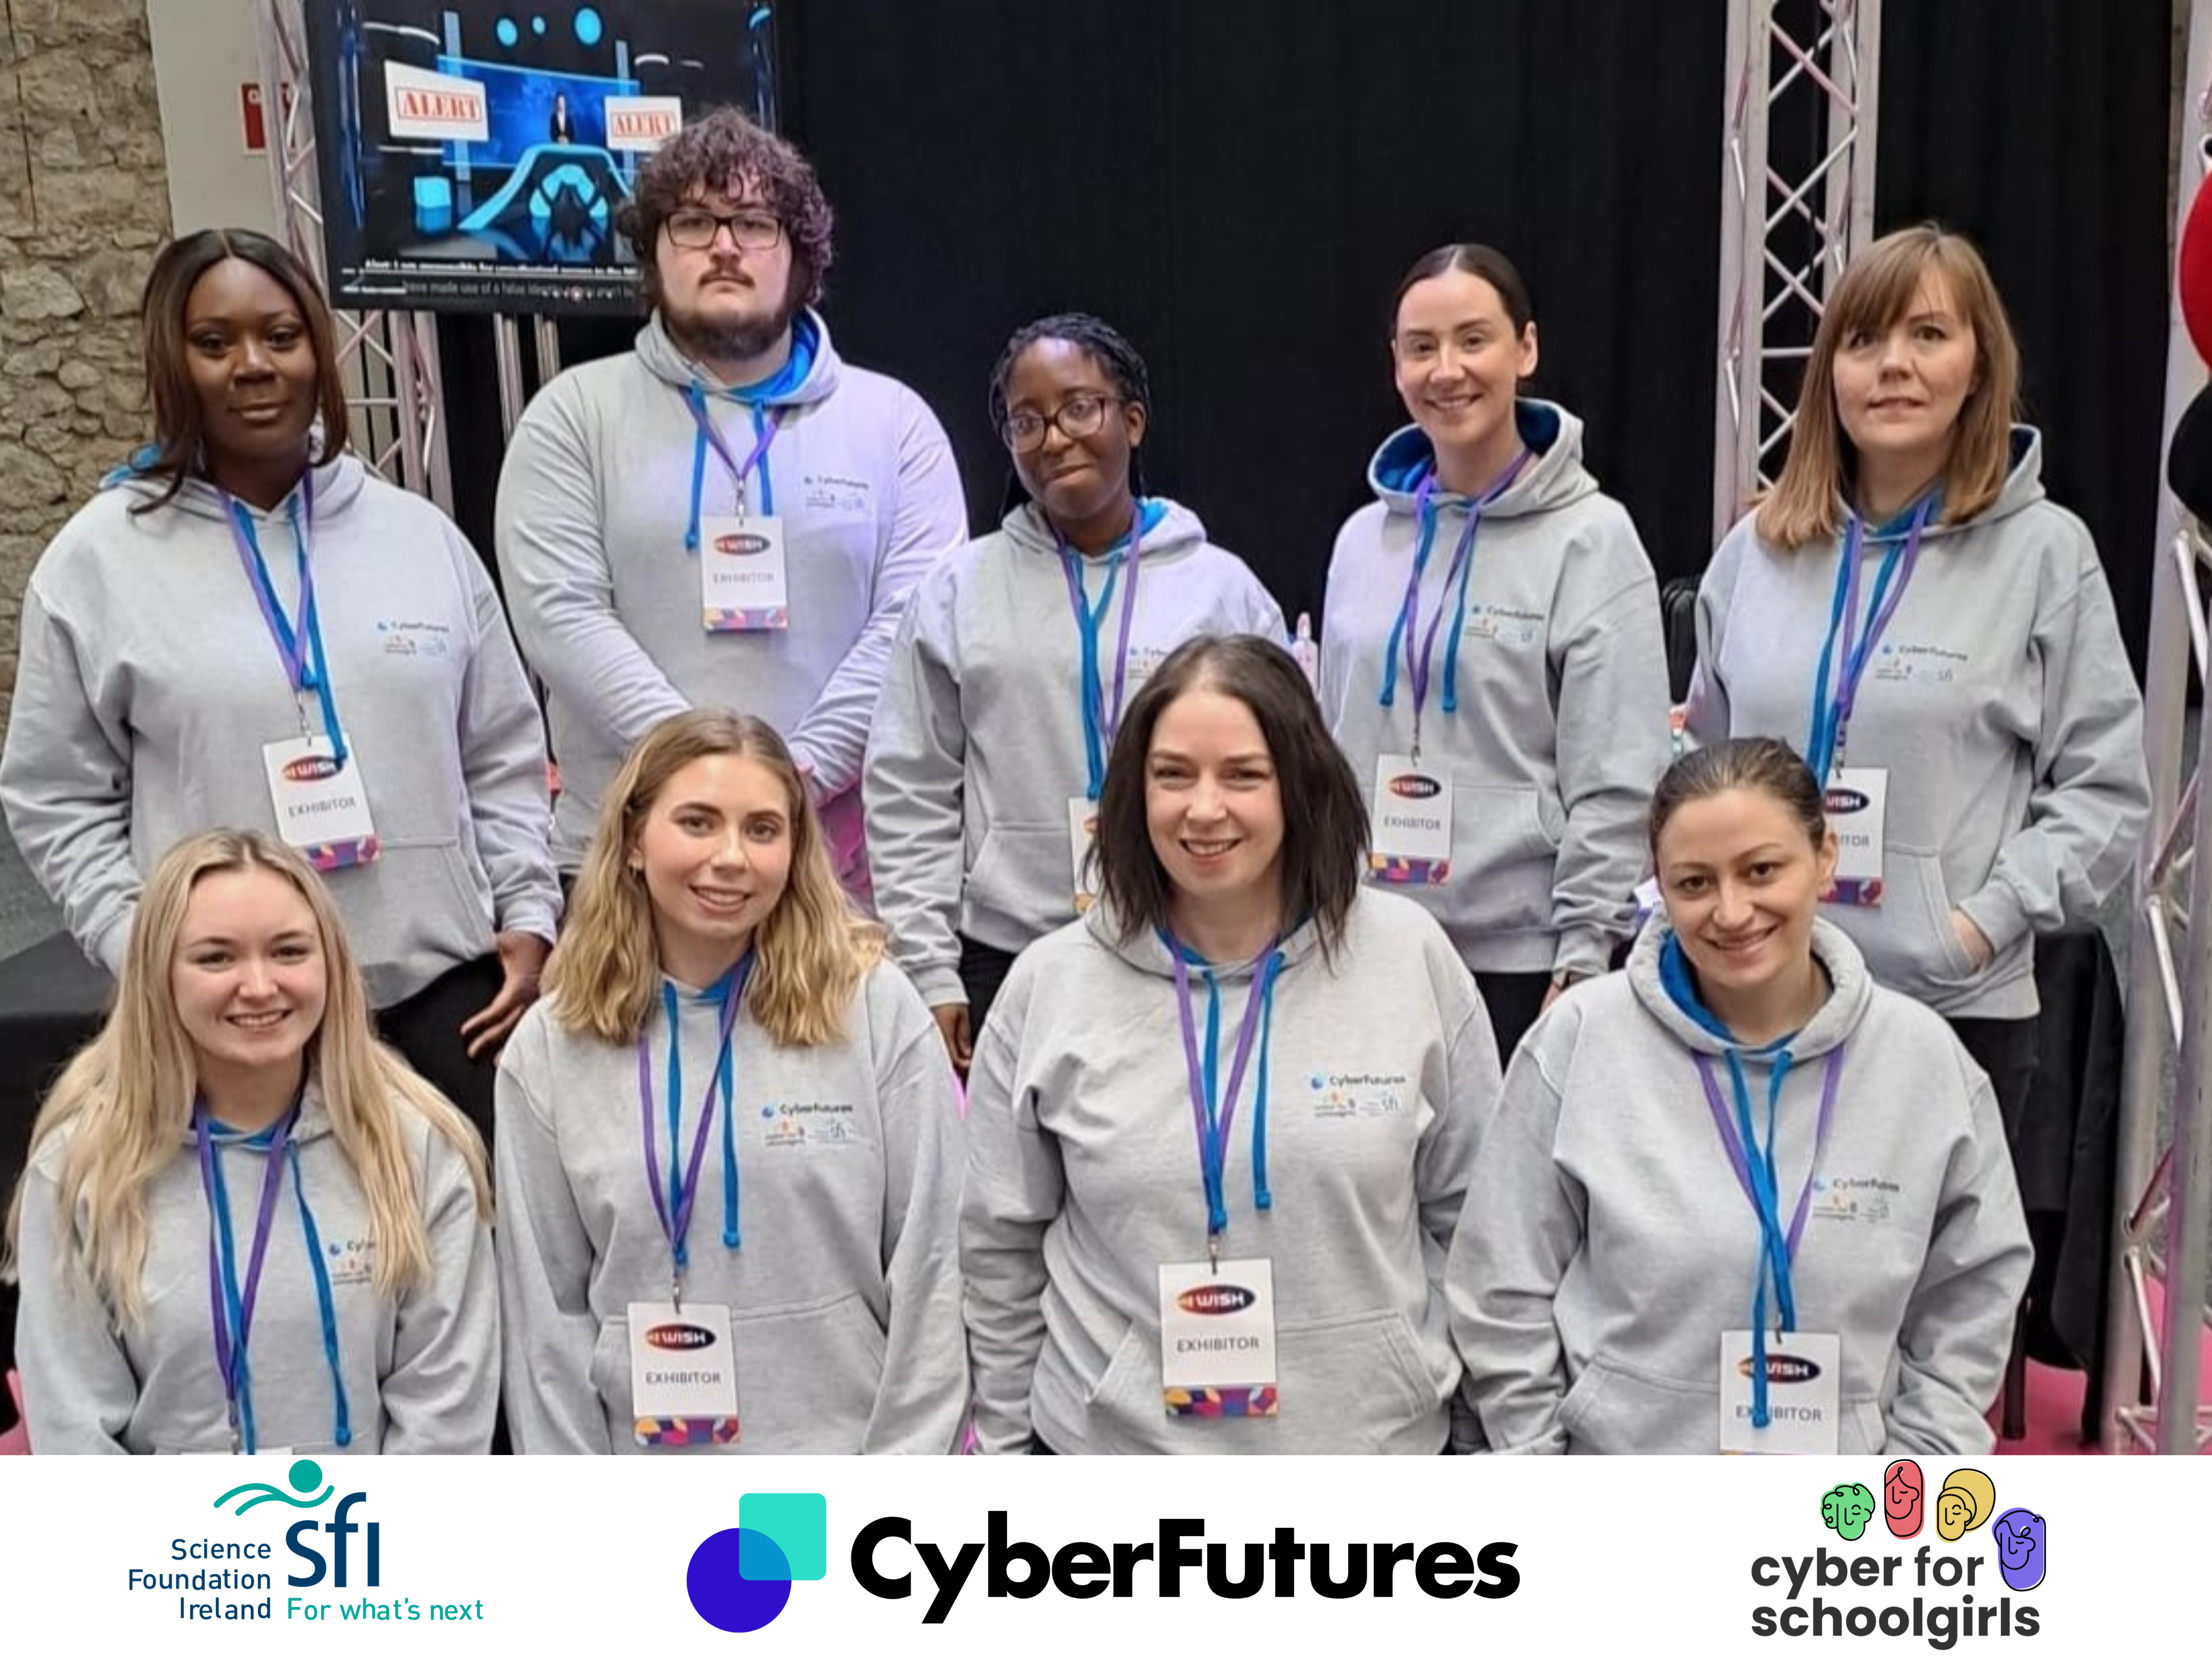 Interns group photo with cyber for schoolgirls at IWISH for cyber Security